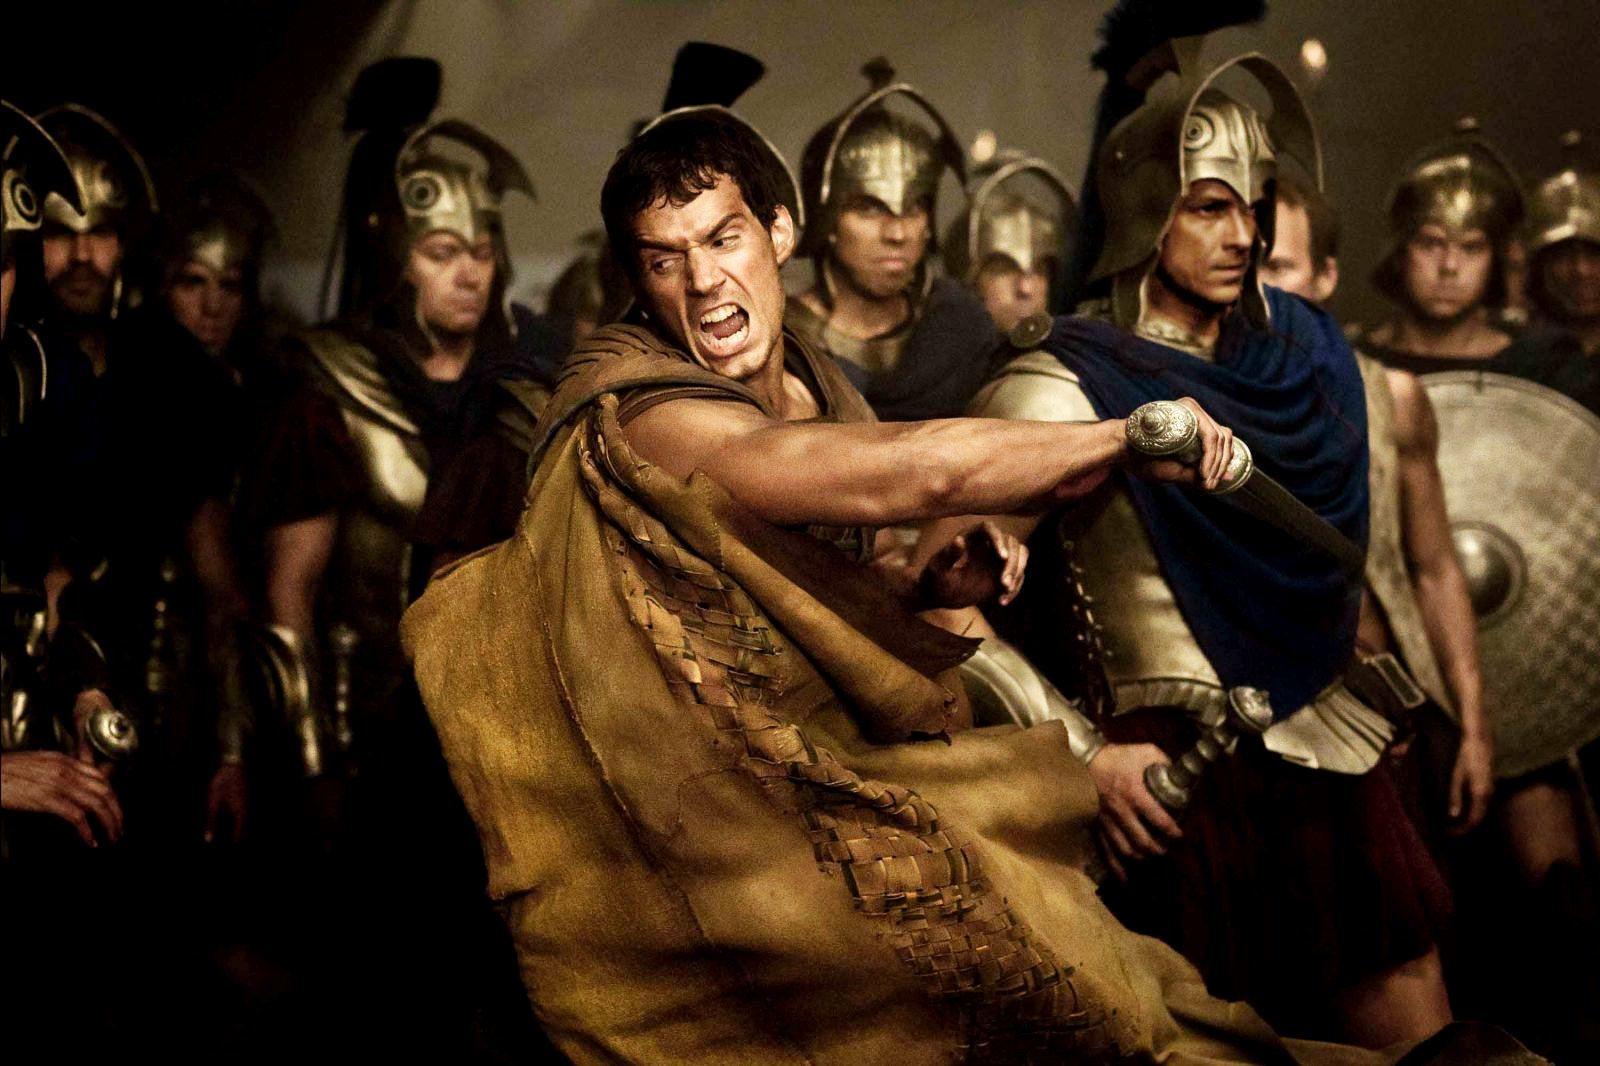 Henry Cavill stars as Theseus in Relativity Media's Immortals (2011). Photo by: Jan Thijs.